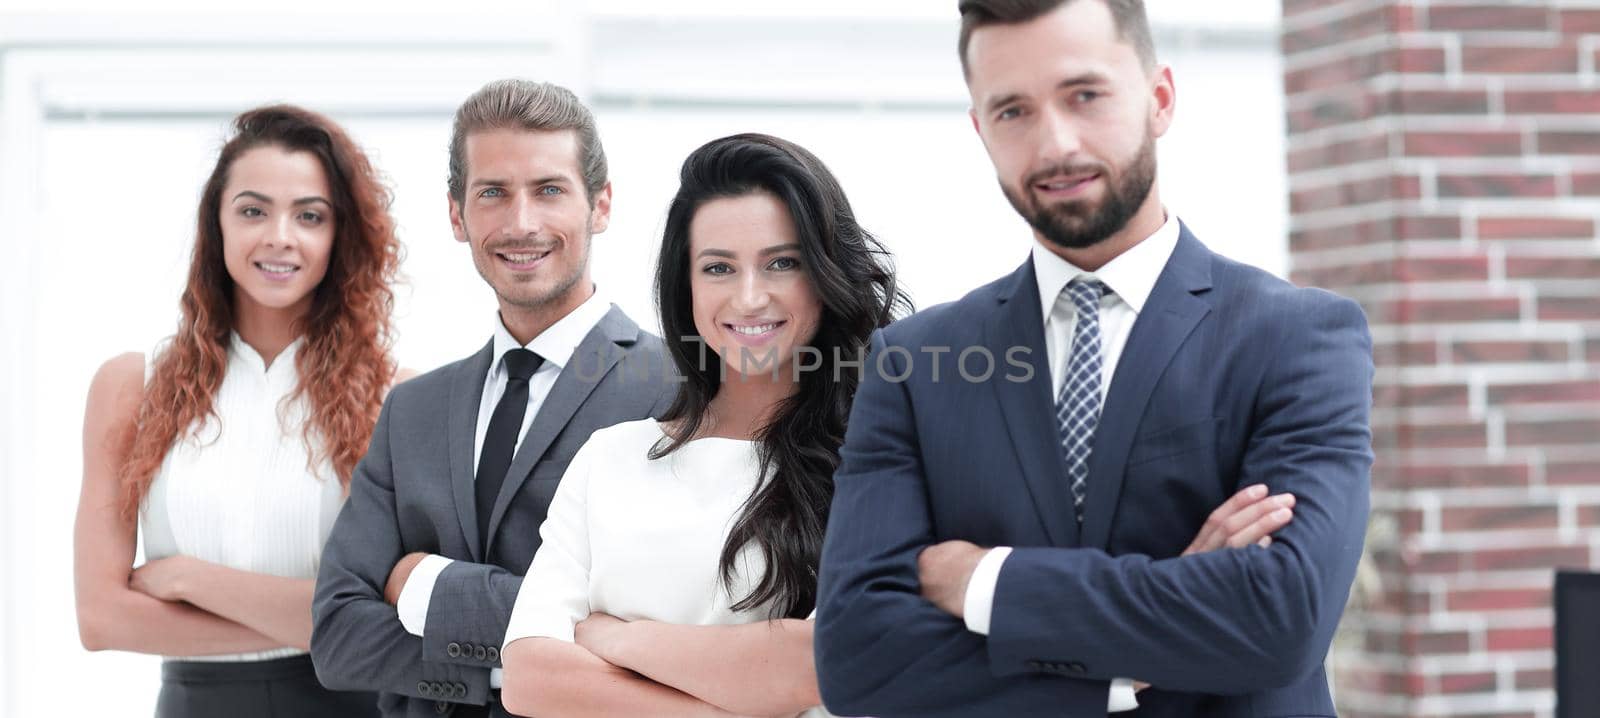 group of smiling business people by asdf